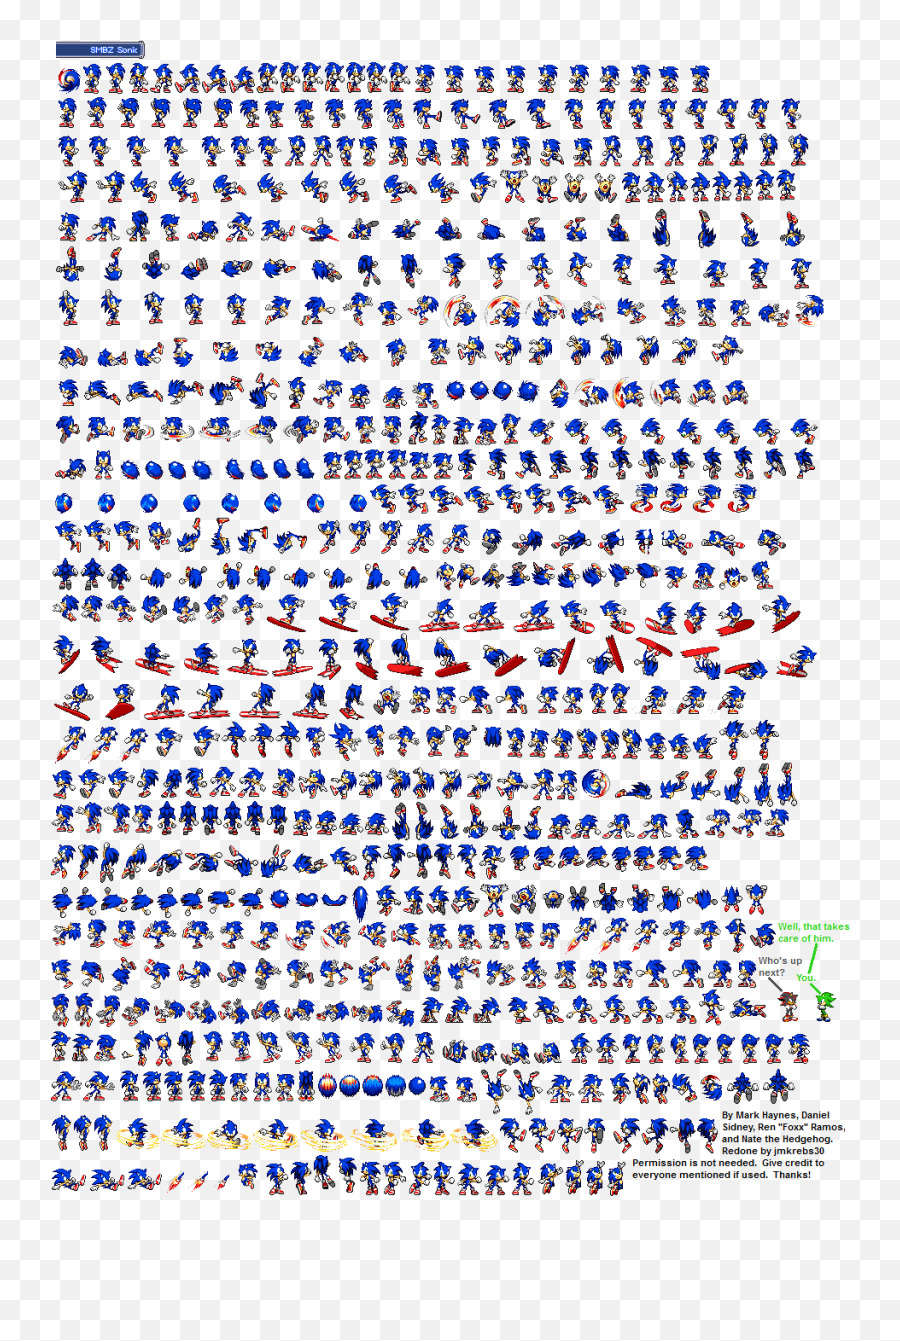 Sonic The Hedgehog Sprites Png - Sonic The Hedgehog Sprite Sheet,Sonic Sprite Png